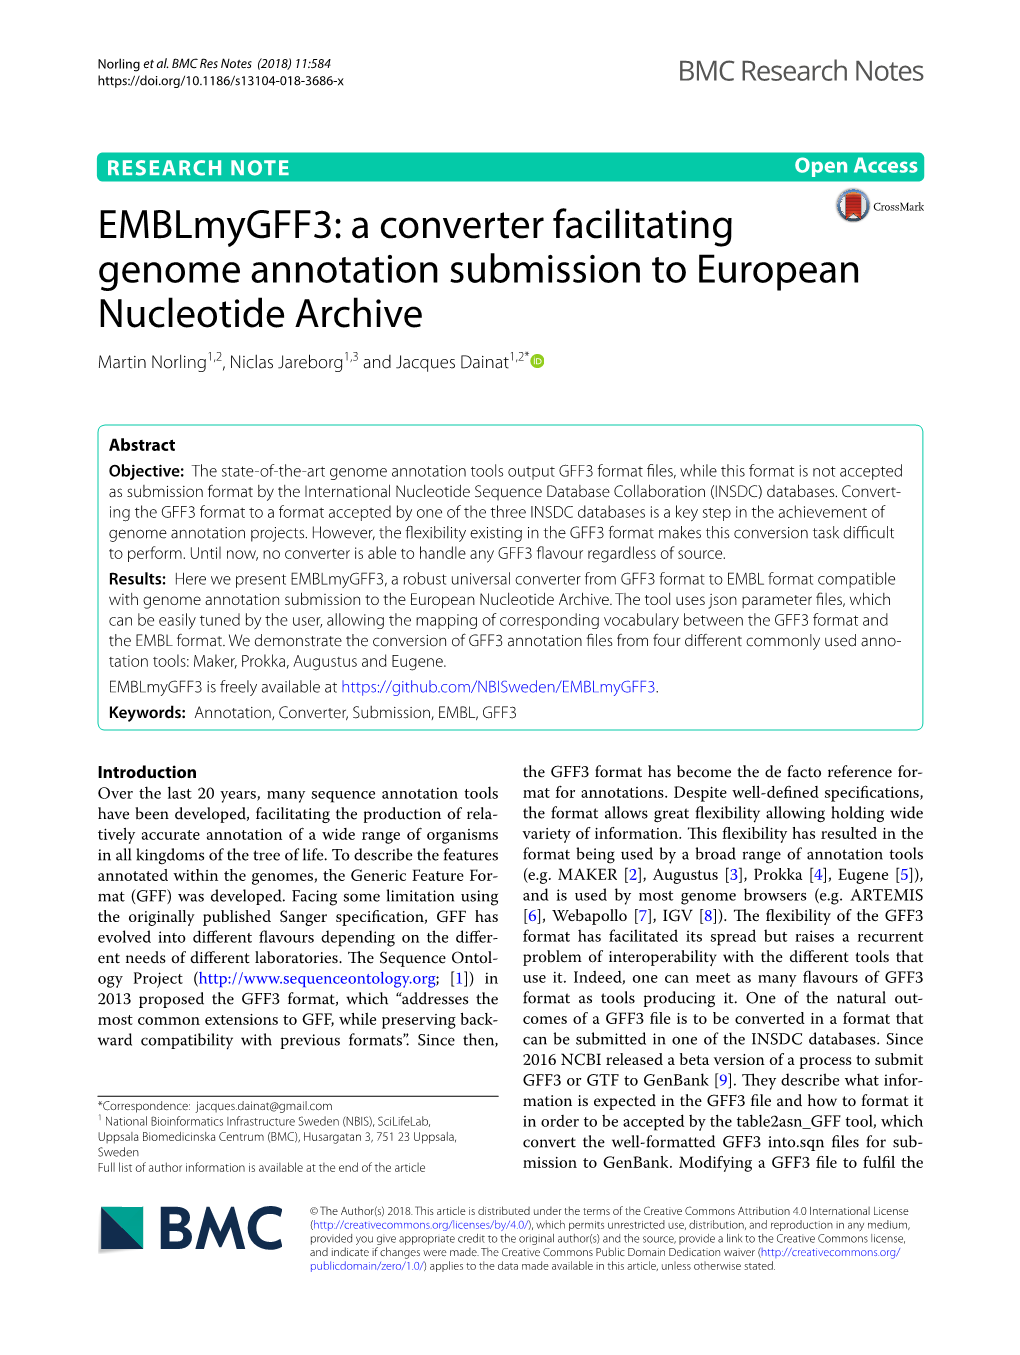 A Converter Facilitating Genome Annotation Submission to European Nucleotide Archive Martin Norling1,2, Niclas Jareborg1,3 and Jacques Dainat1,2*